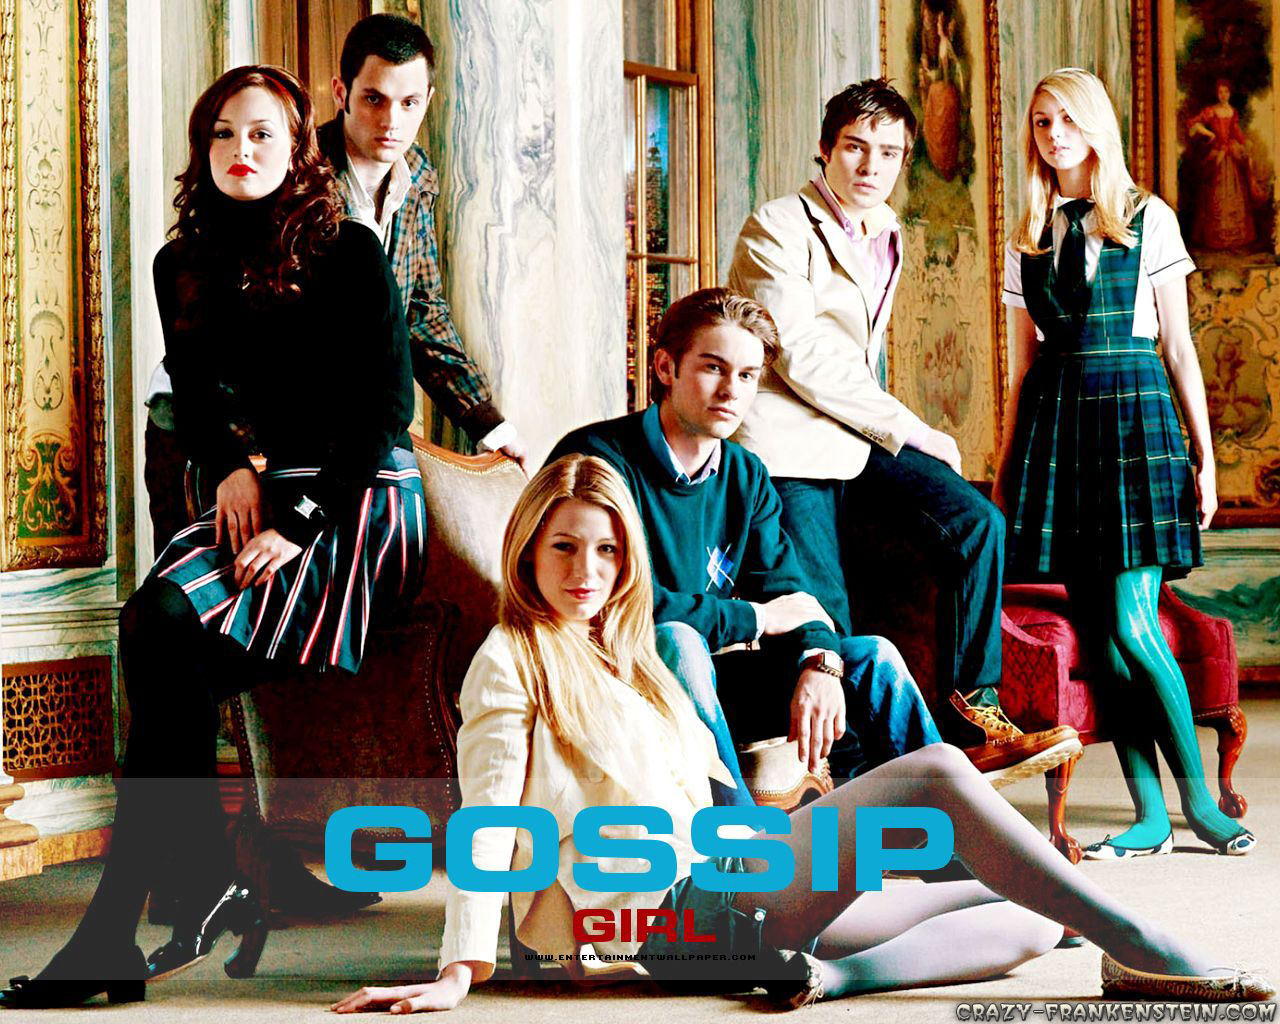 Gossip Girl Wallpaper  Download to your mobile from PHONEKY